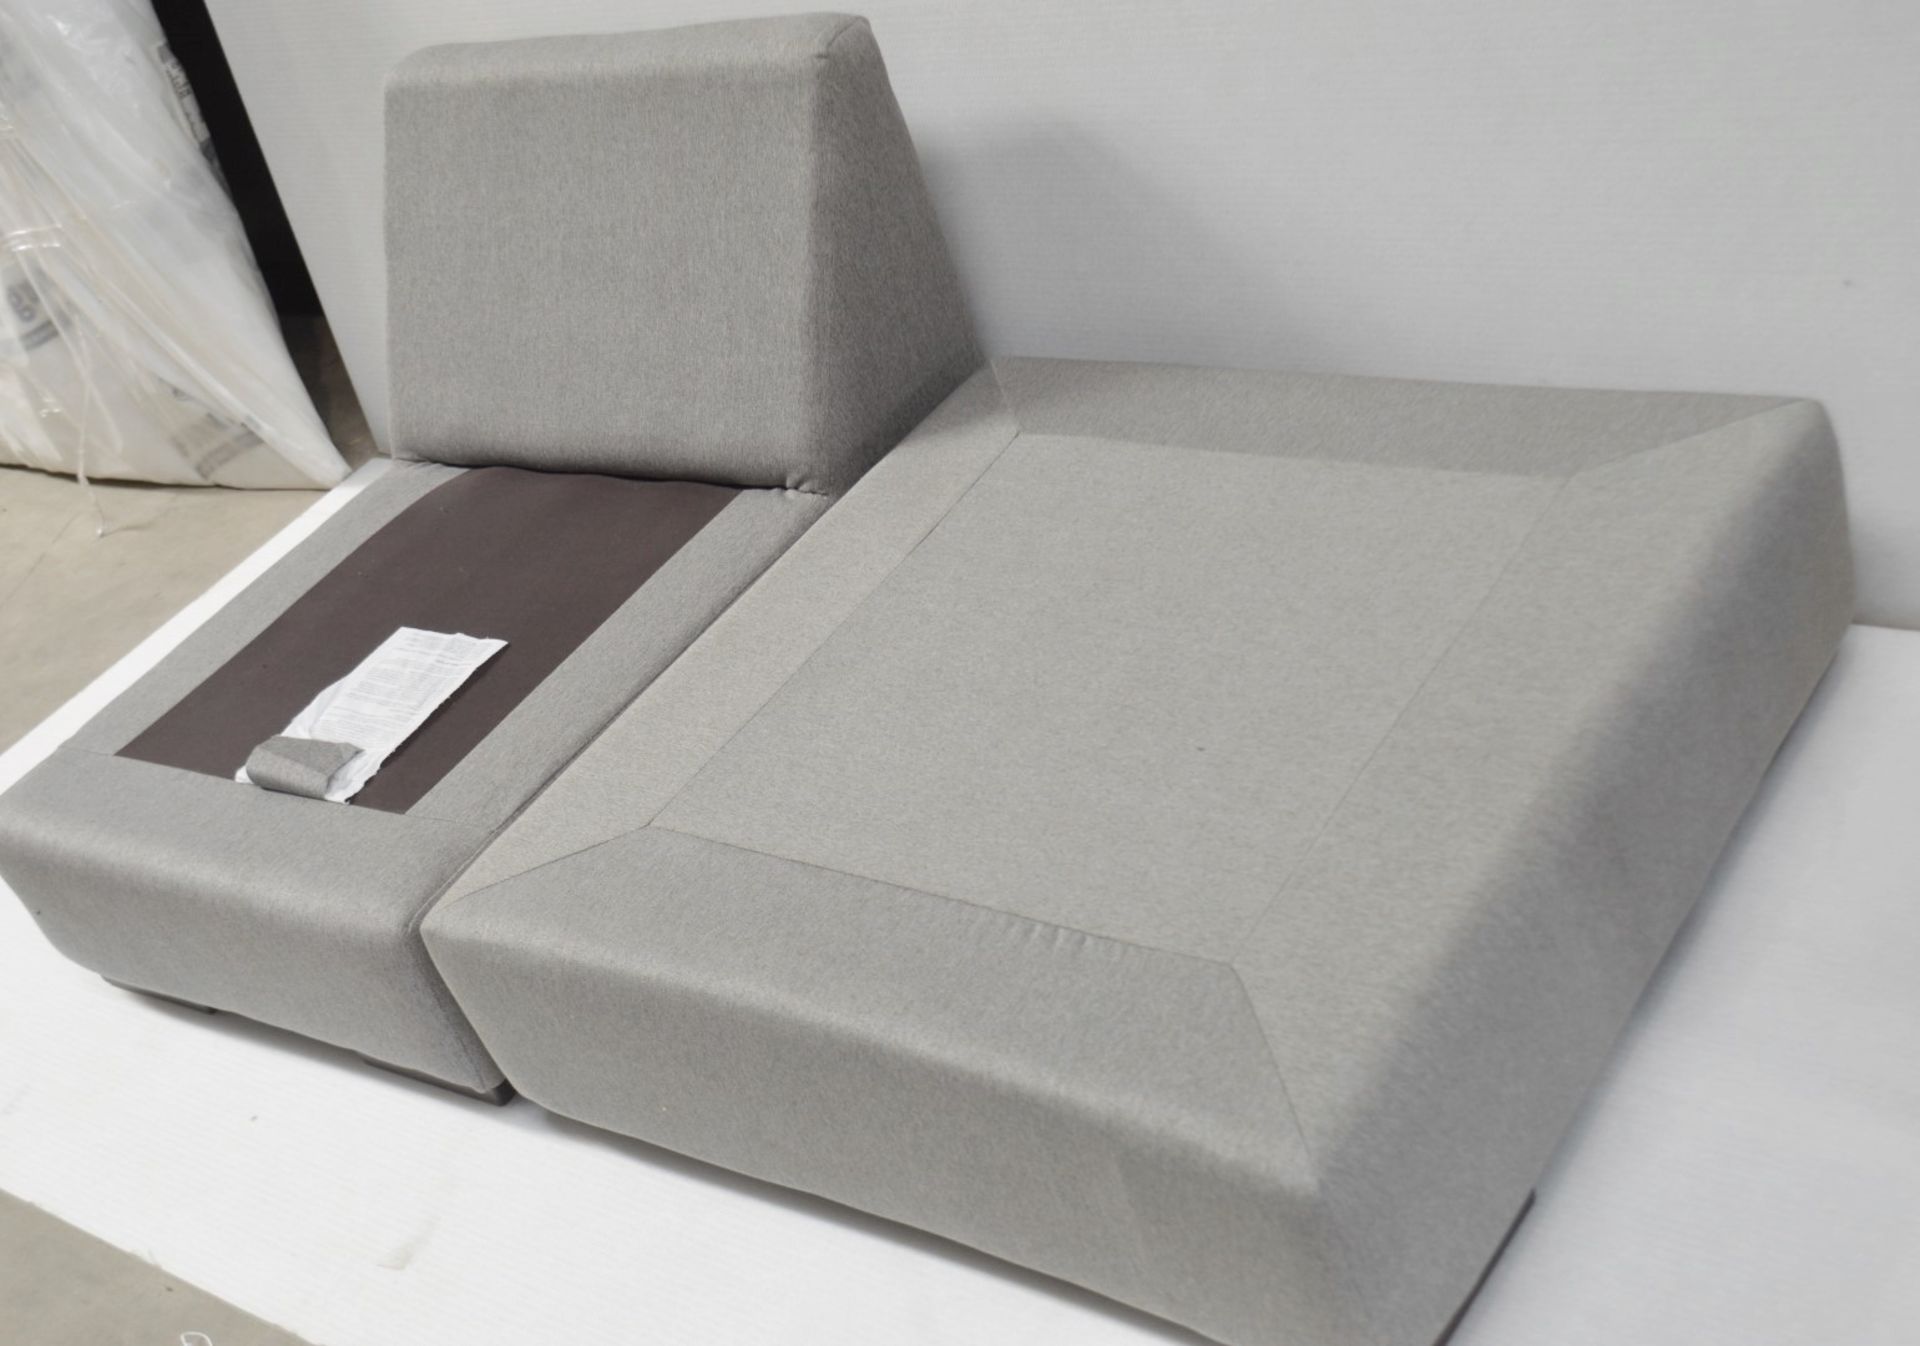 1 x Modular Chaise Lounge Upholstered In A Light Grey Fabric - Dimensions: D90 x L160 x H66cm / Seat - Image 3 of 8